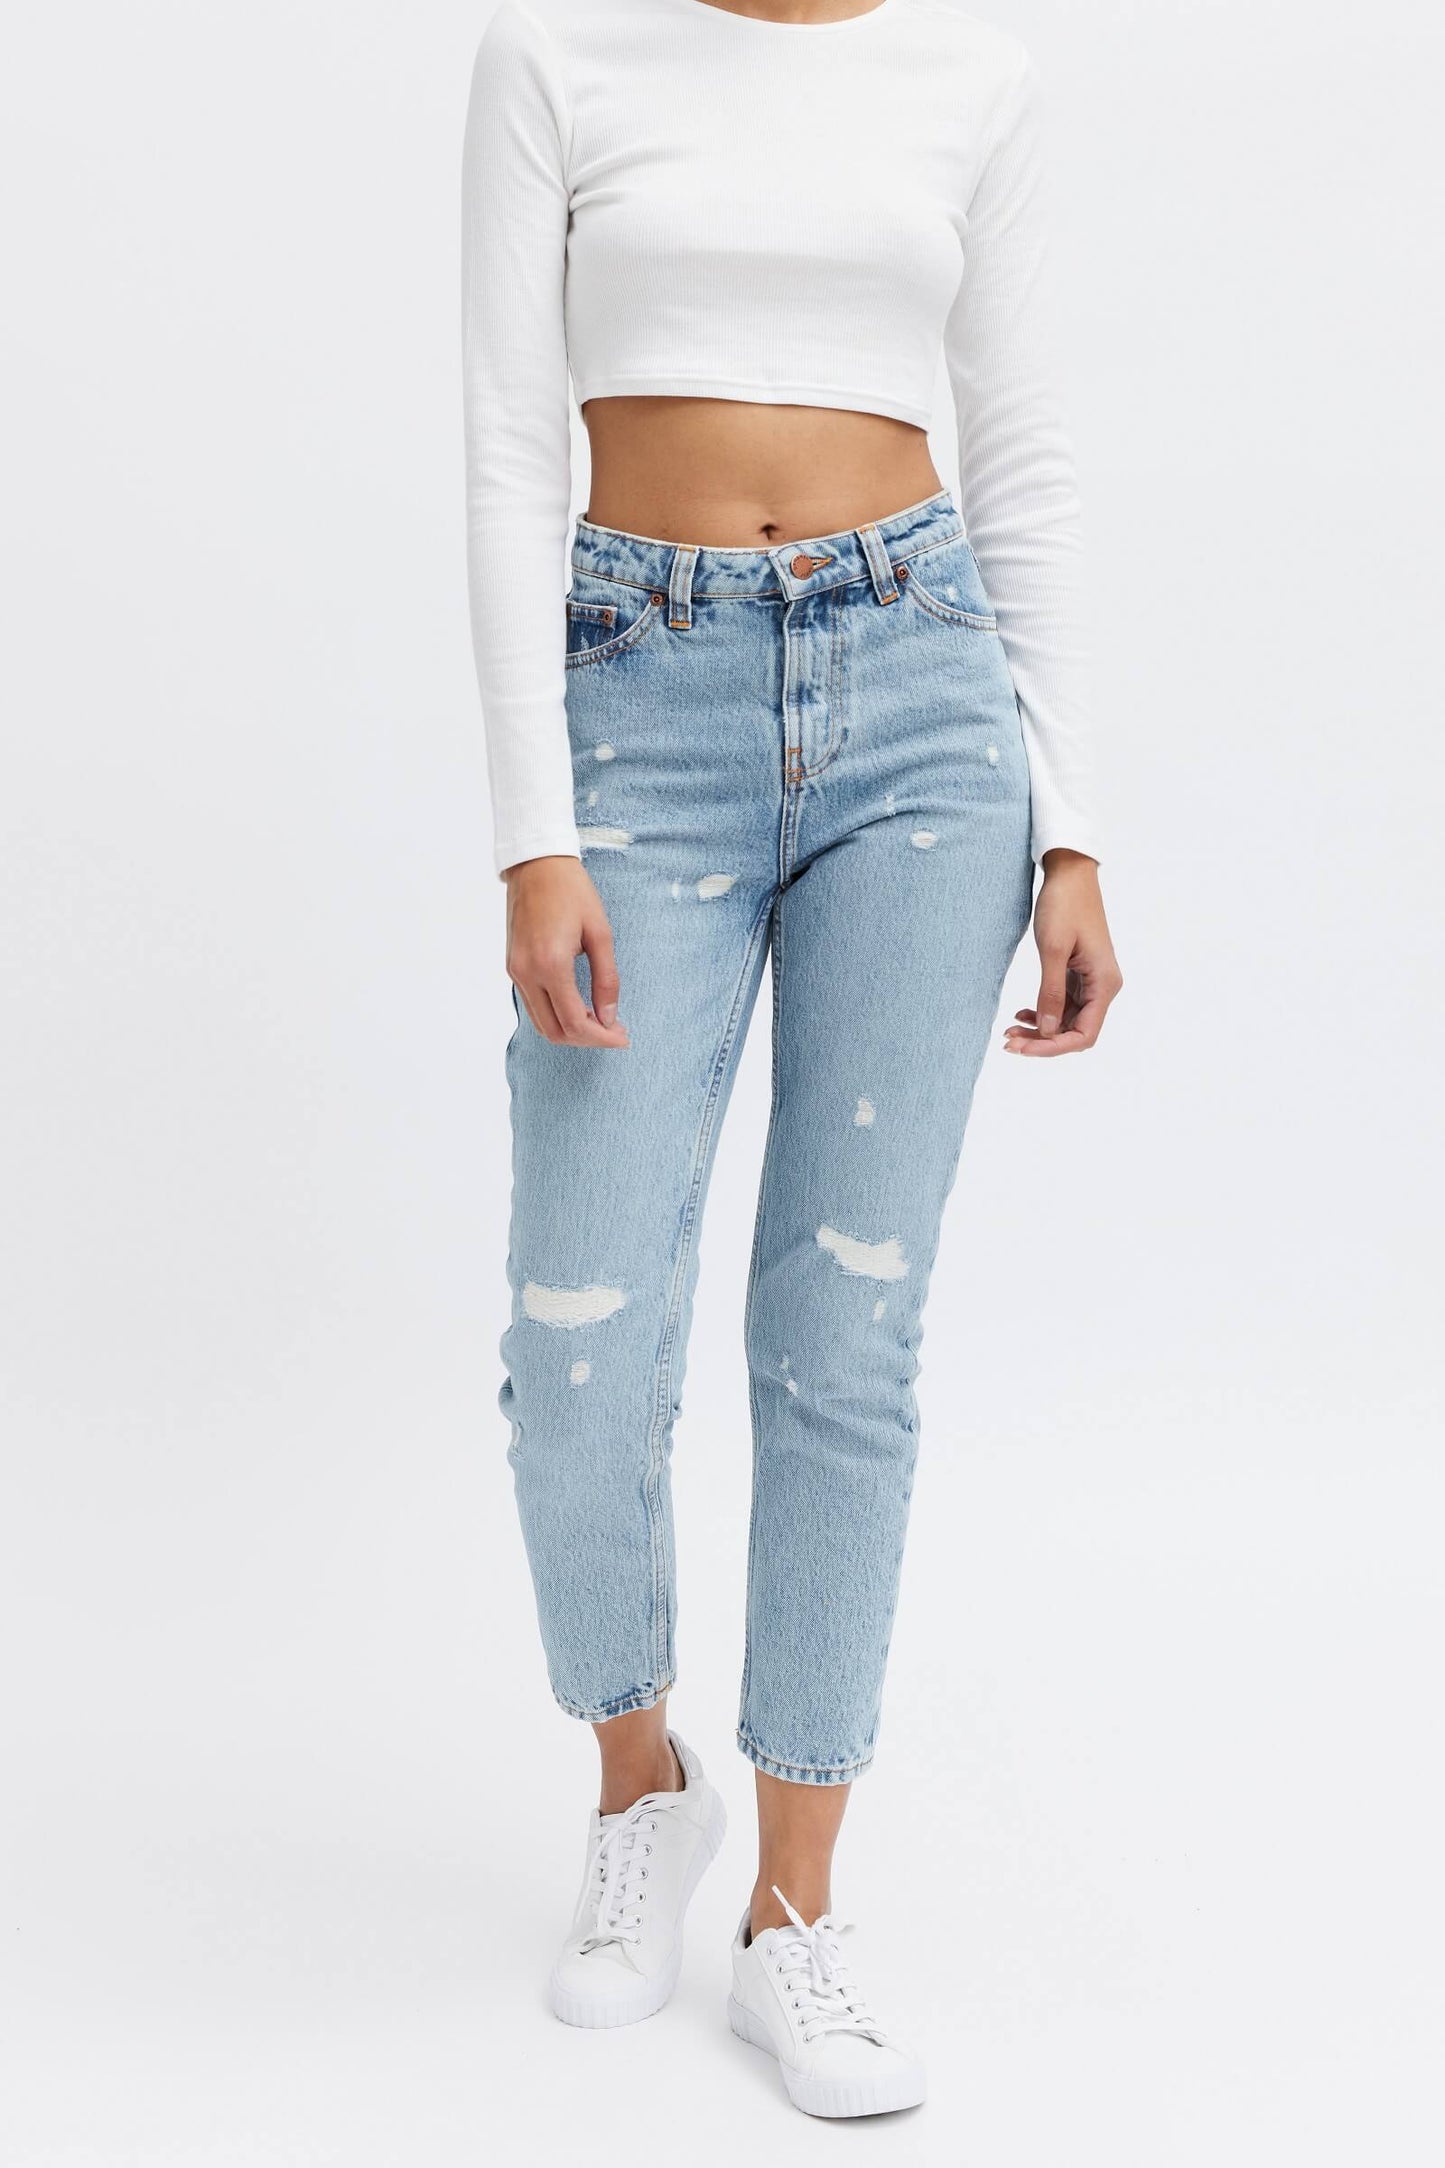 high rise ethical pants. Ripped denim 